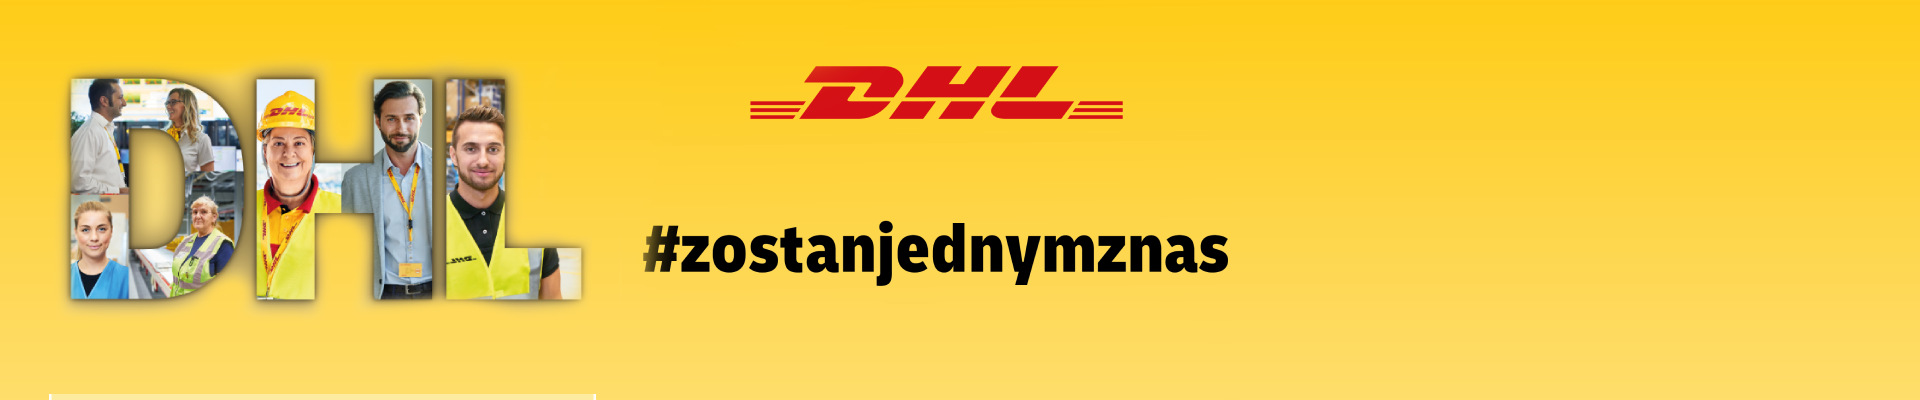 DHL Exel Supply Chain